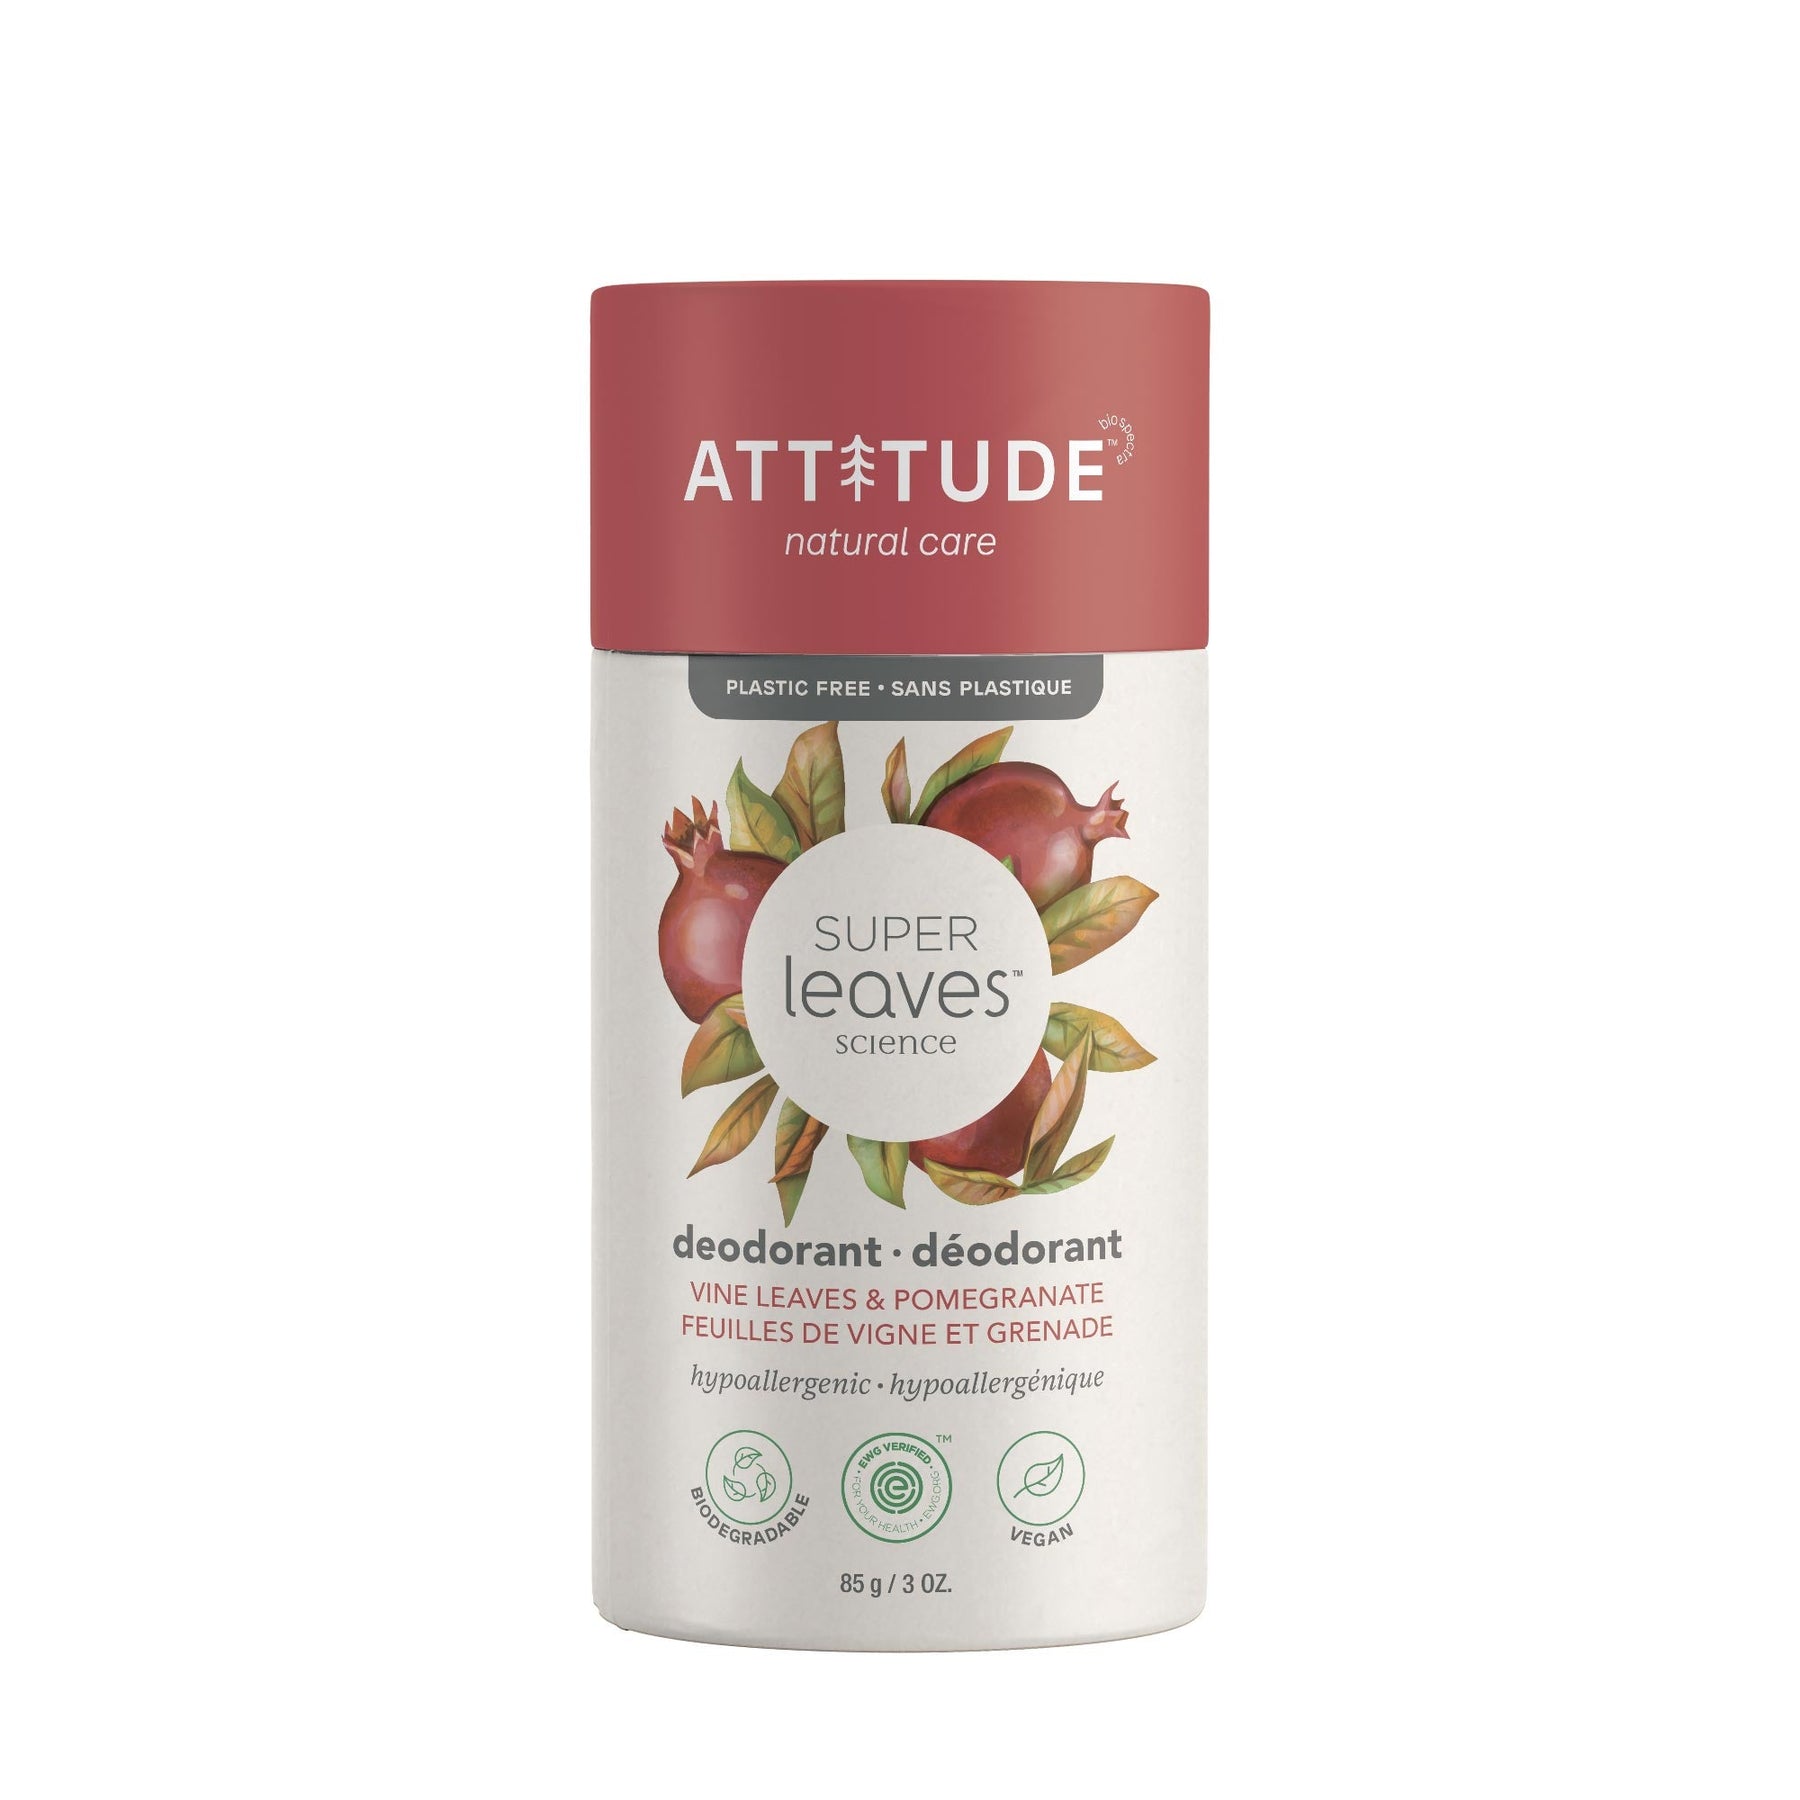 Plastic Free Deodorant : SUPER LEAVES™ - Vine Leaves and pomegranate - by ATTITUDE |ProCare Outlet|